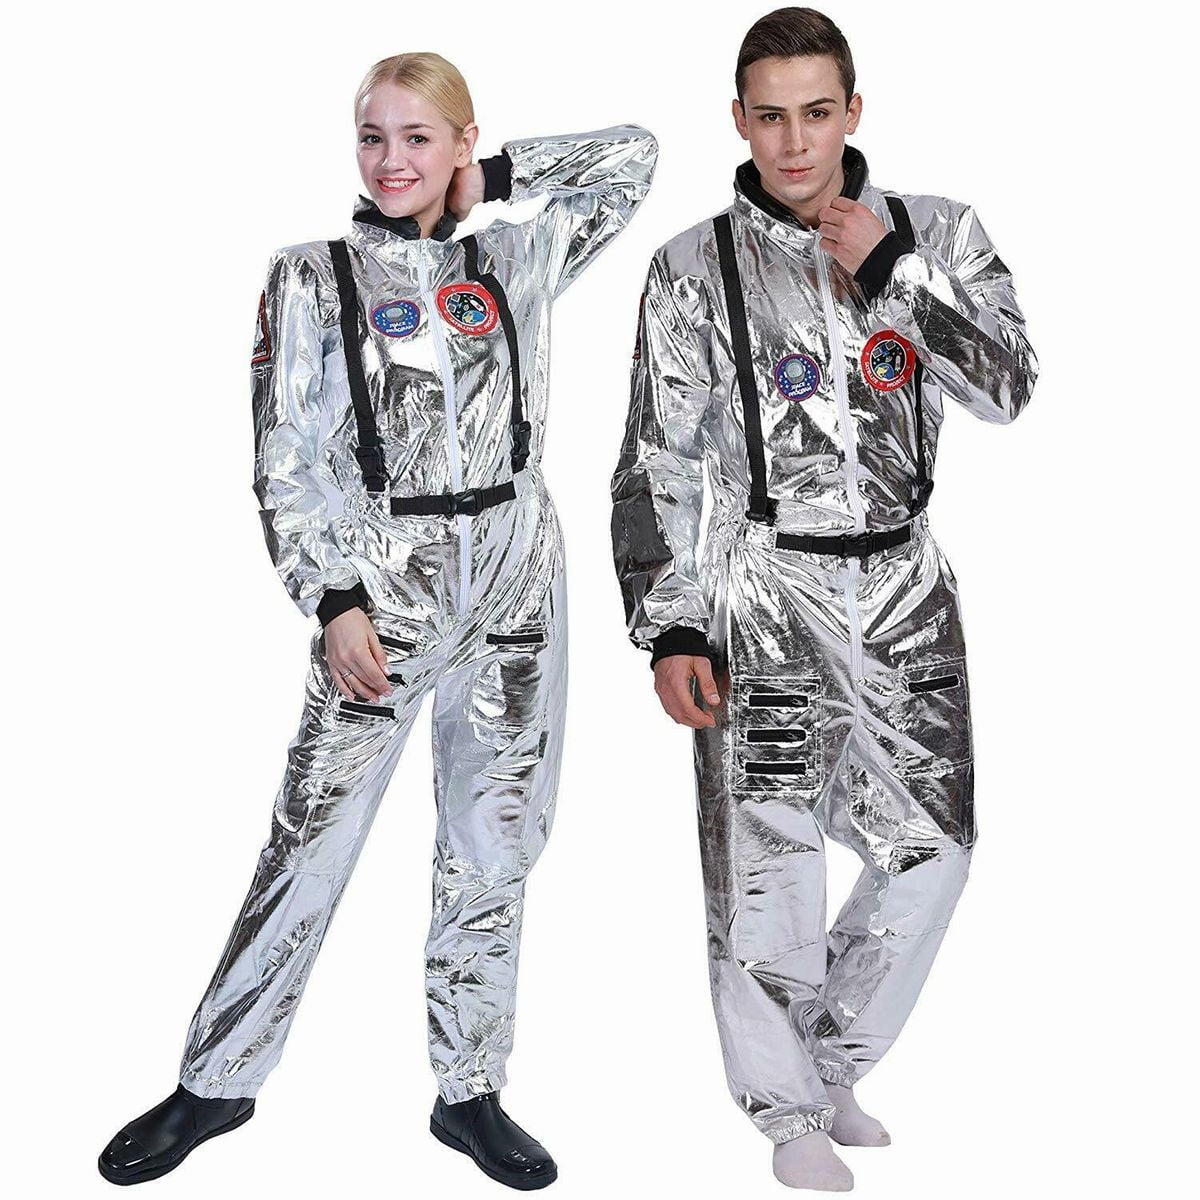 Men's Astronaut Spaceman Costume Halloween Cosplay Outfits Dress Up (L ...